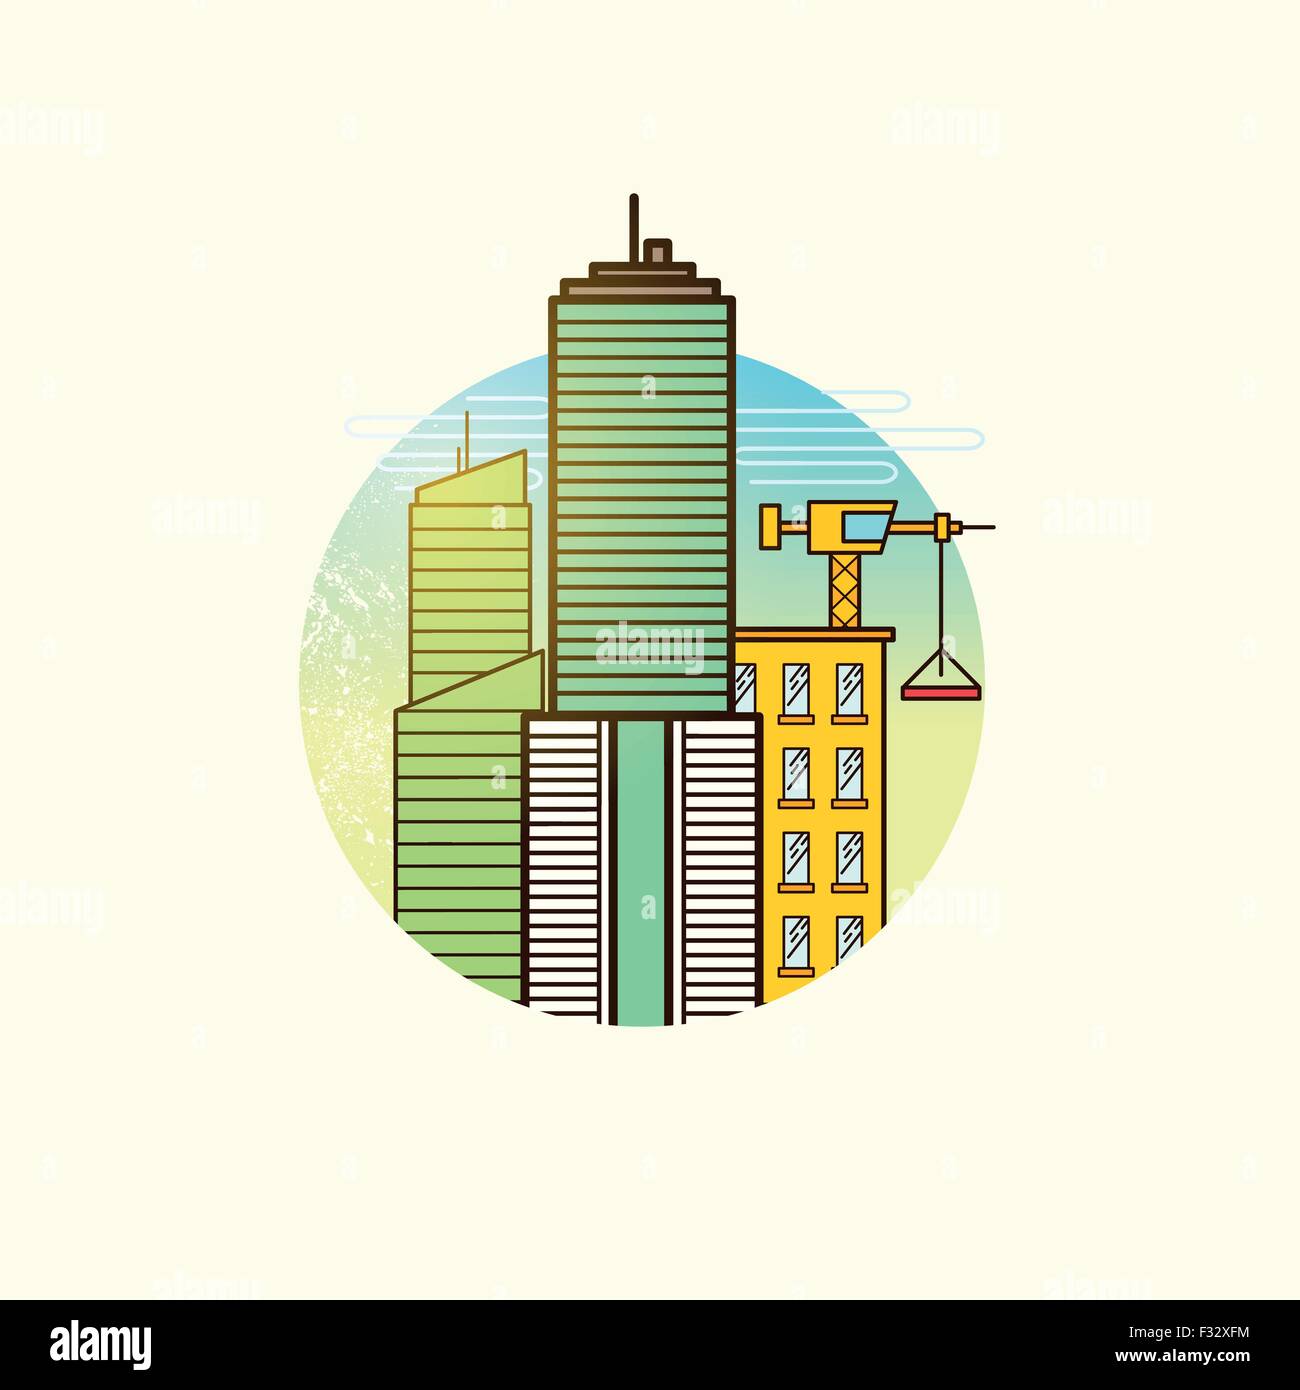 Developing City Vector. Construction and real estate vector illustration symbol. Stock Vector